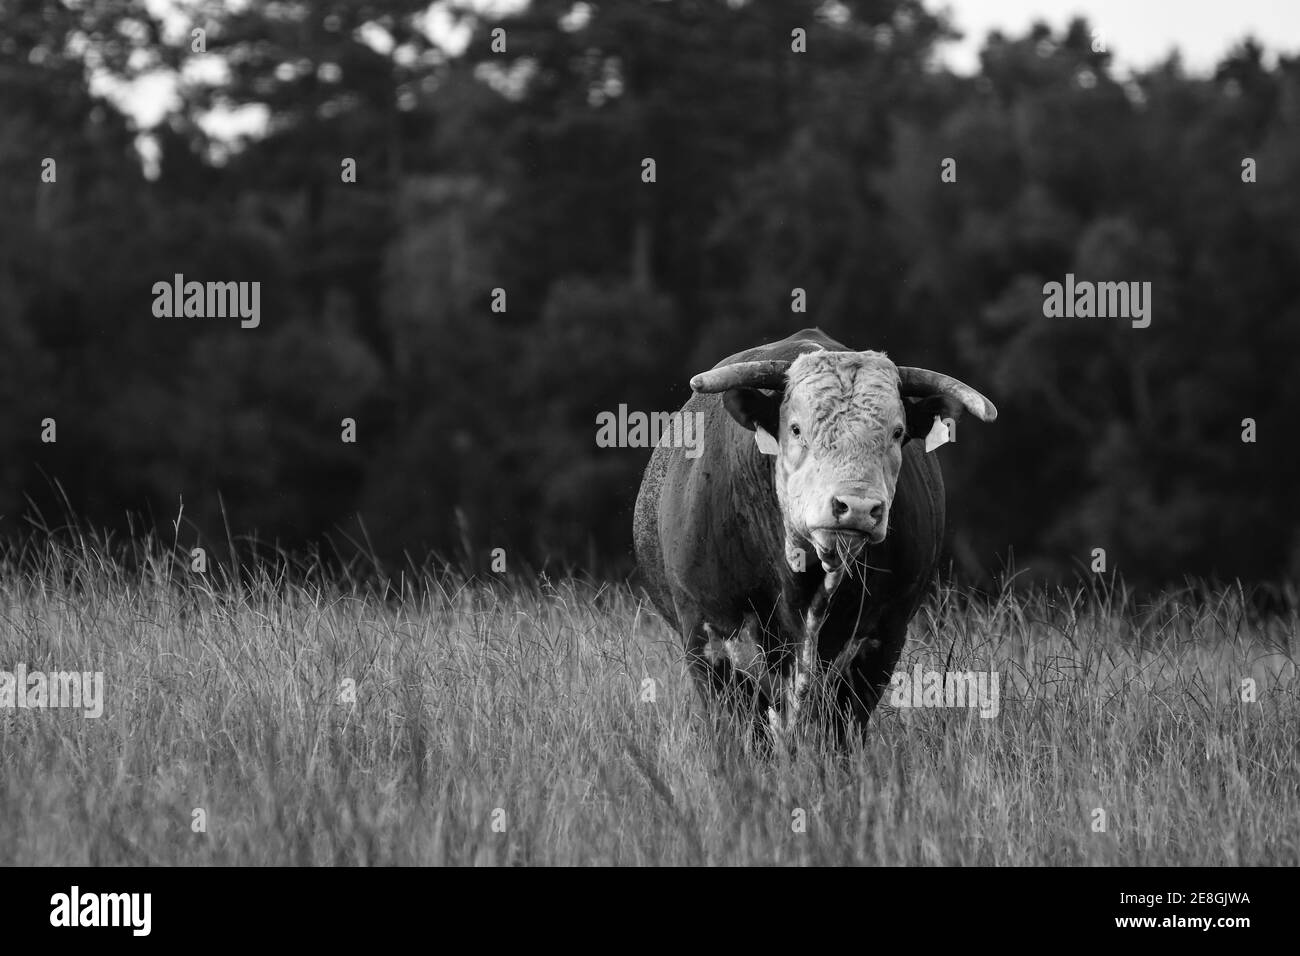 Horned Hereford bull standing in a field of tall grass Stock Photo